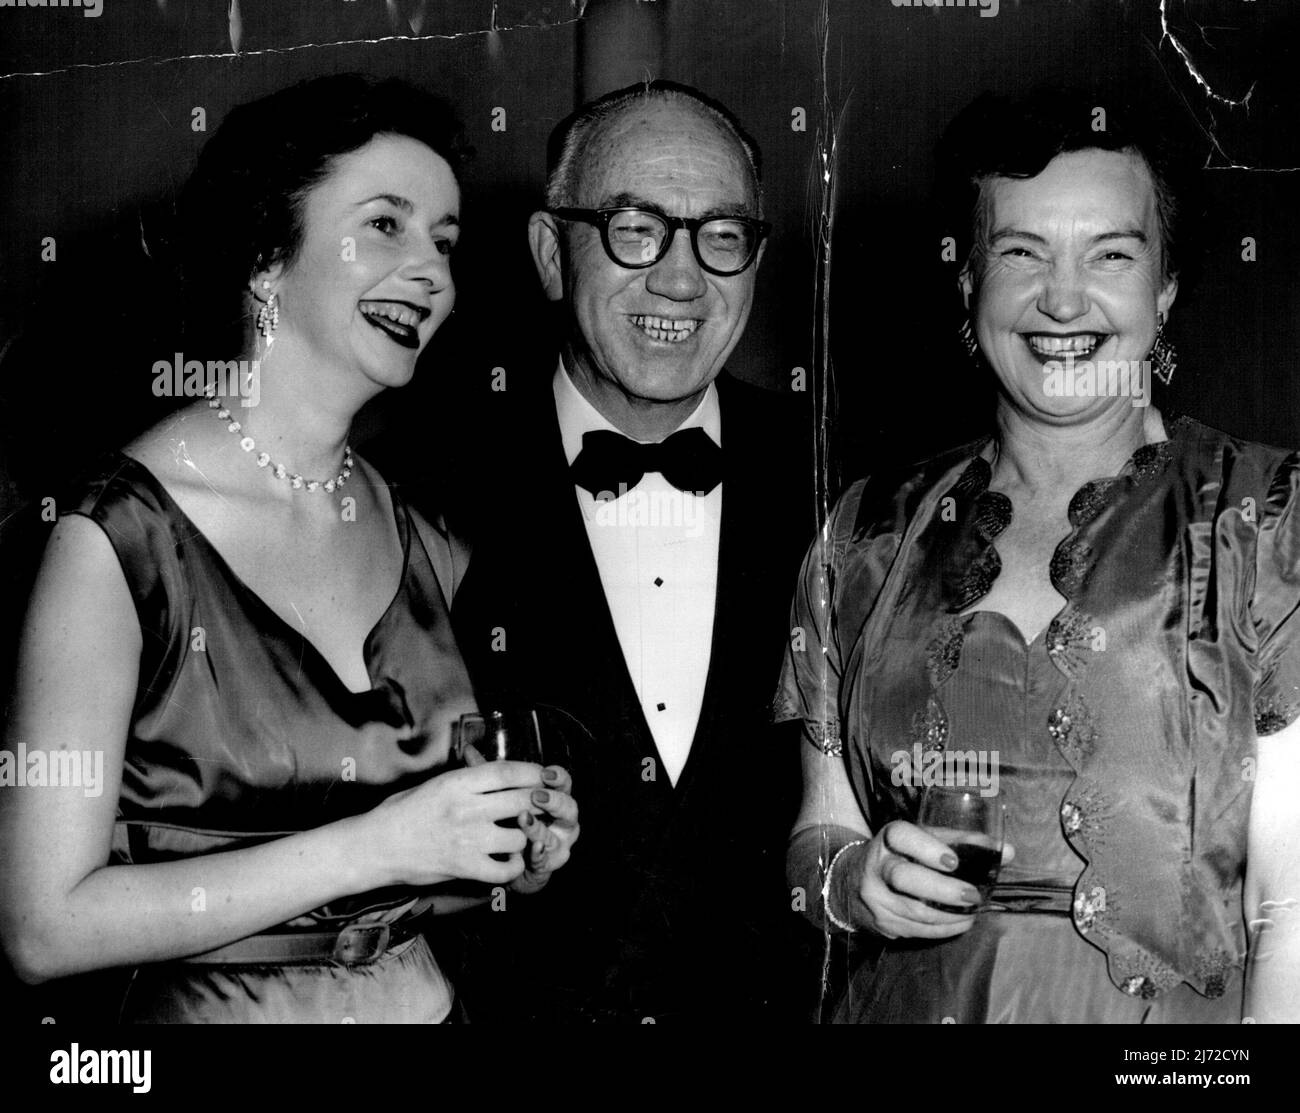 Miss Jill Maher, Mr. F. Meere and Mrs. Madge Fox at Trade and customs Ball. June 30, 1955. (Photo by Kenneth Charles Redshaw/Fairfax Media). Stock Photo